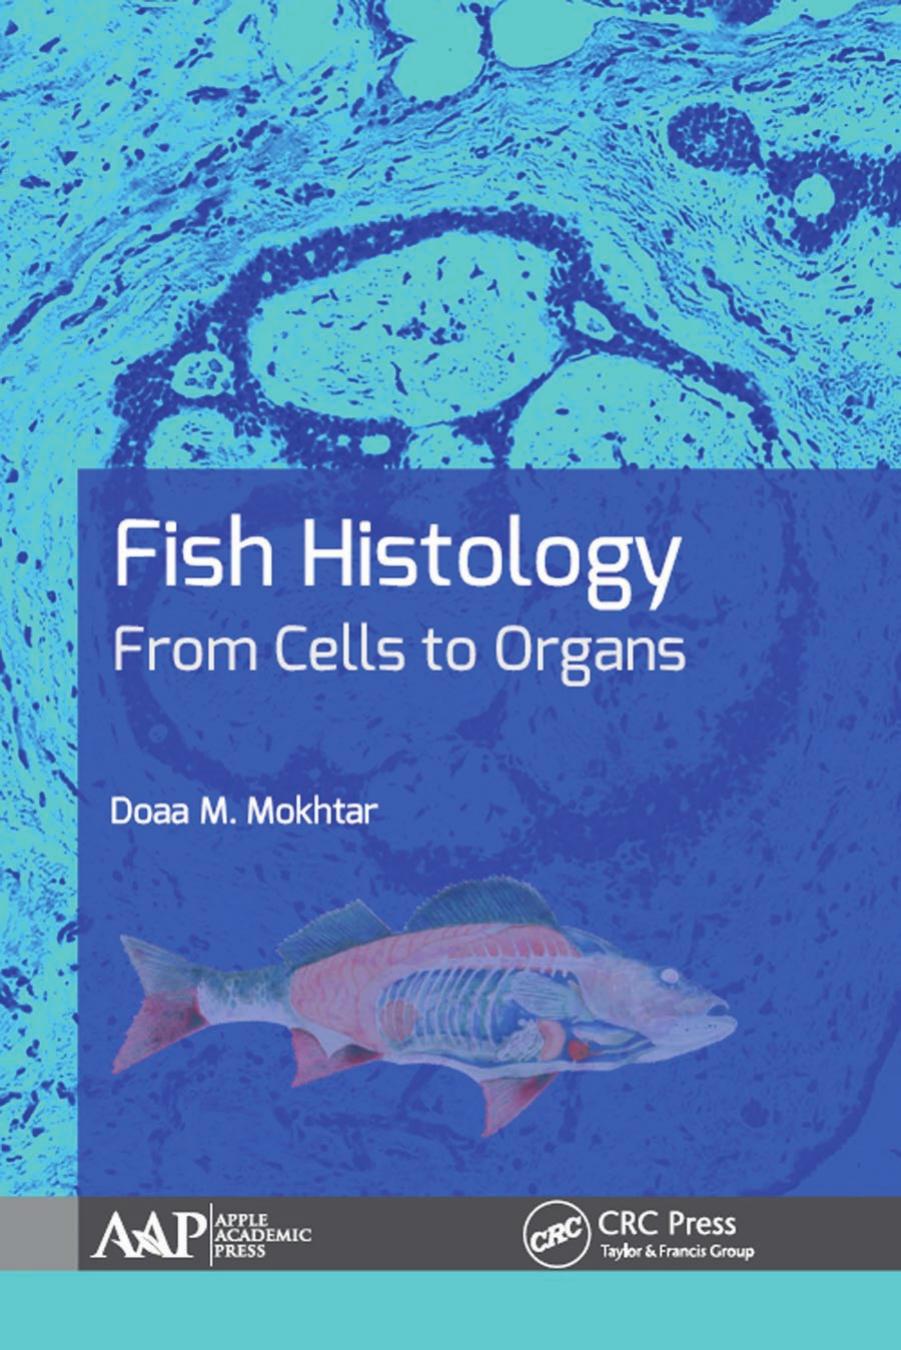 Fish Histology, From Cells to Organs